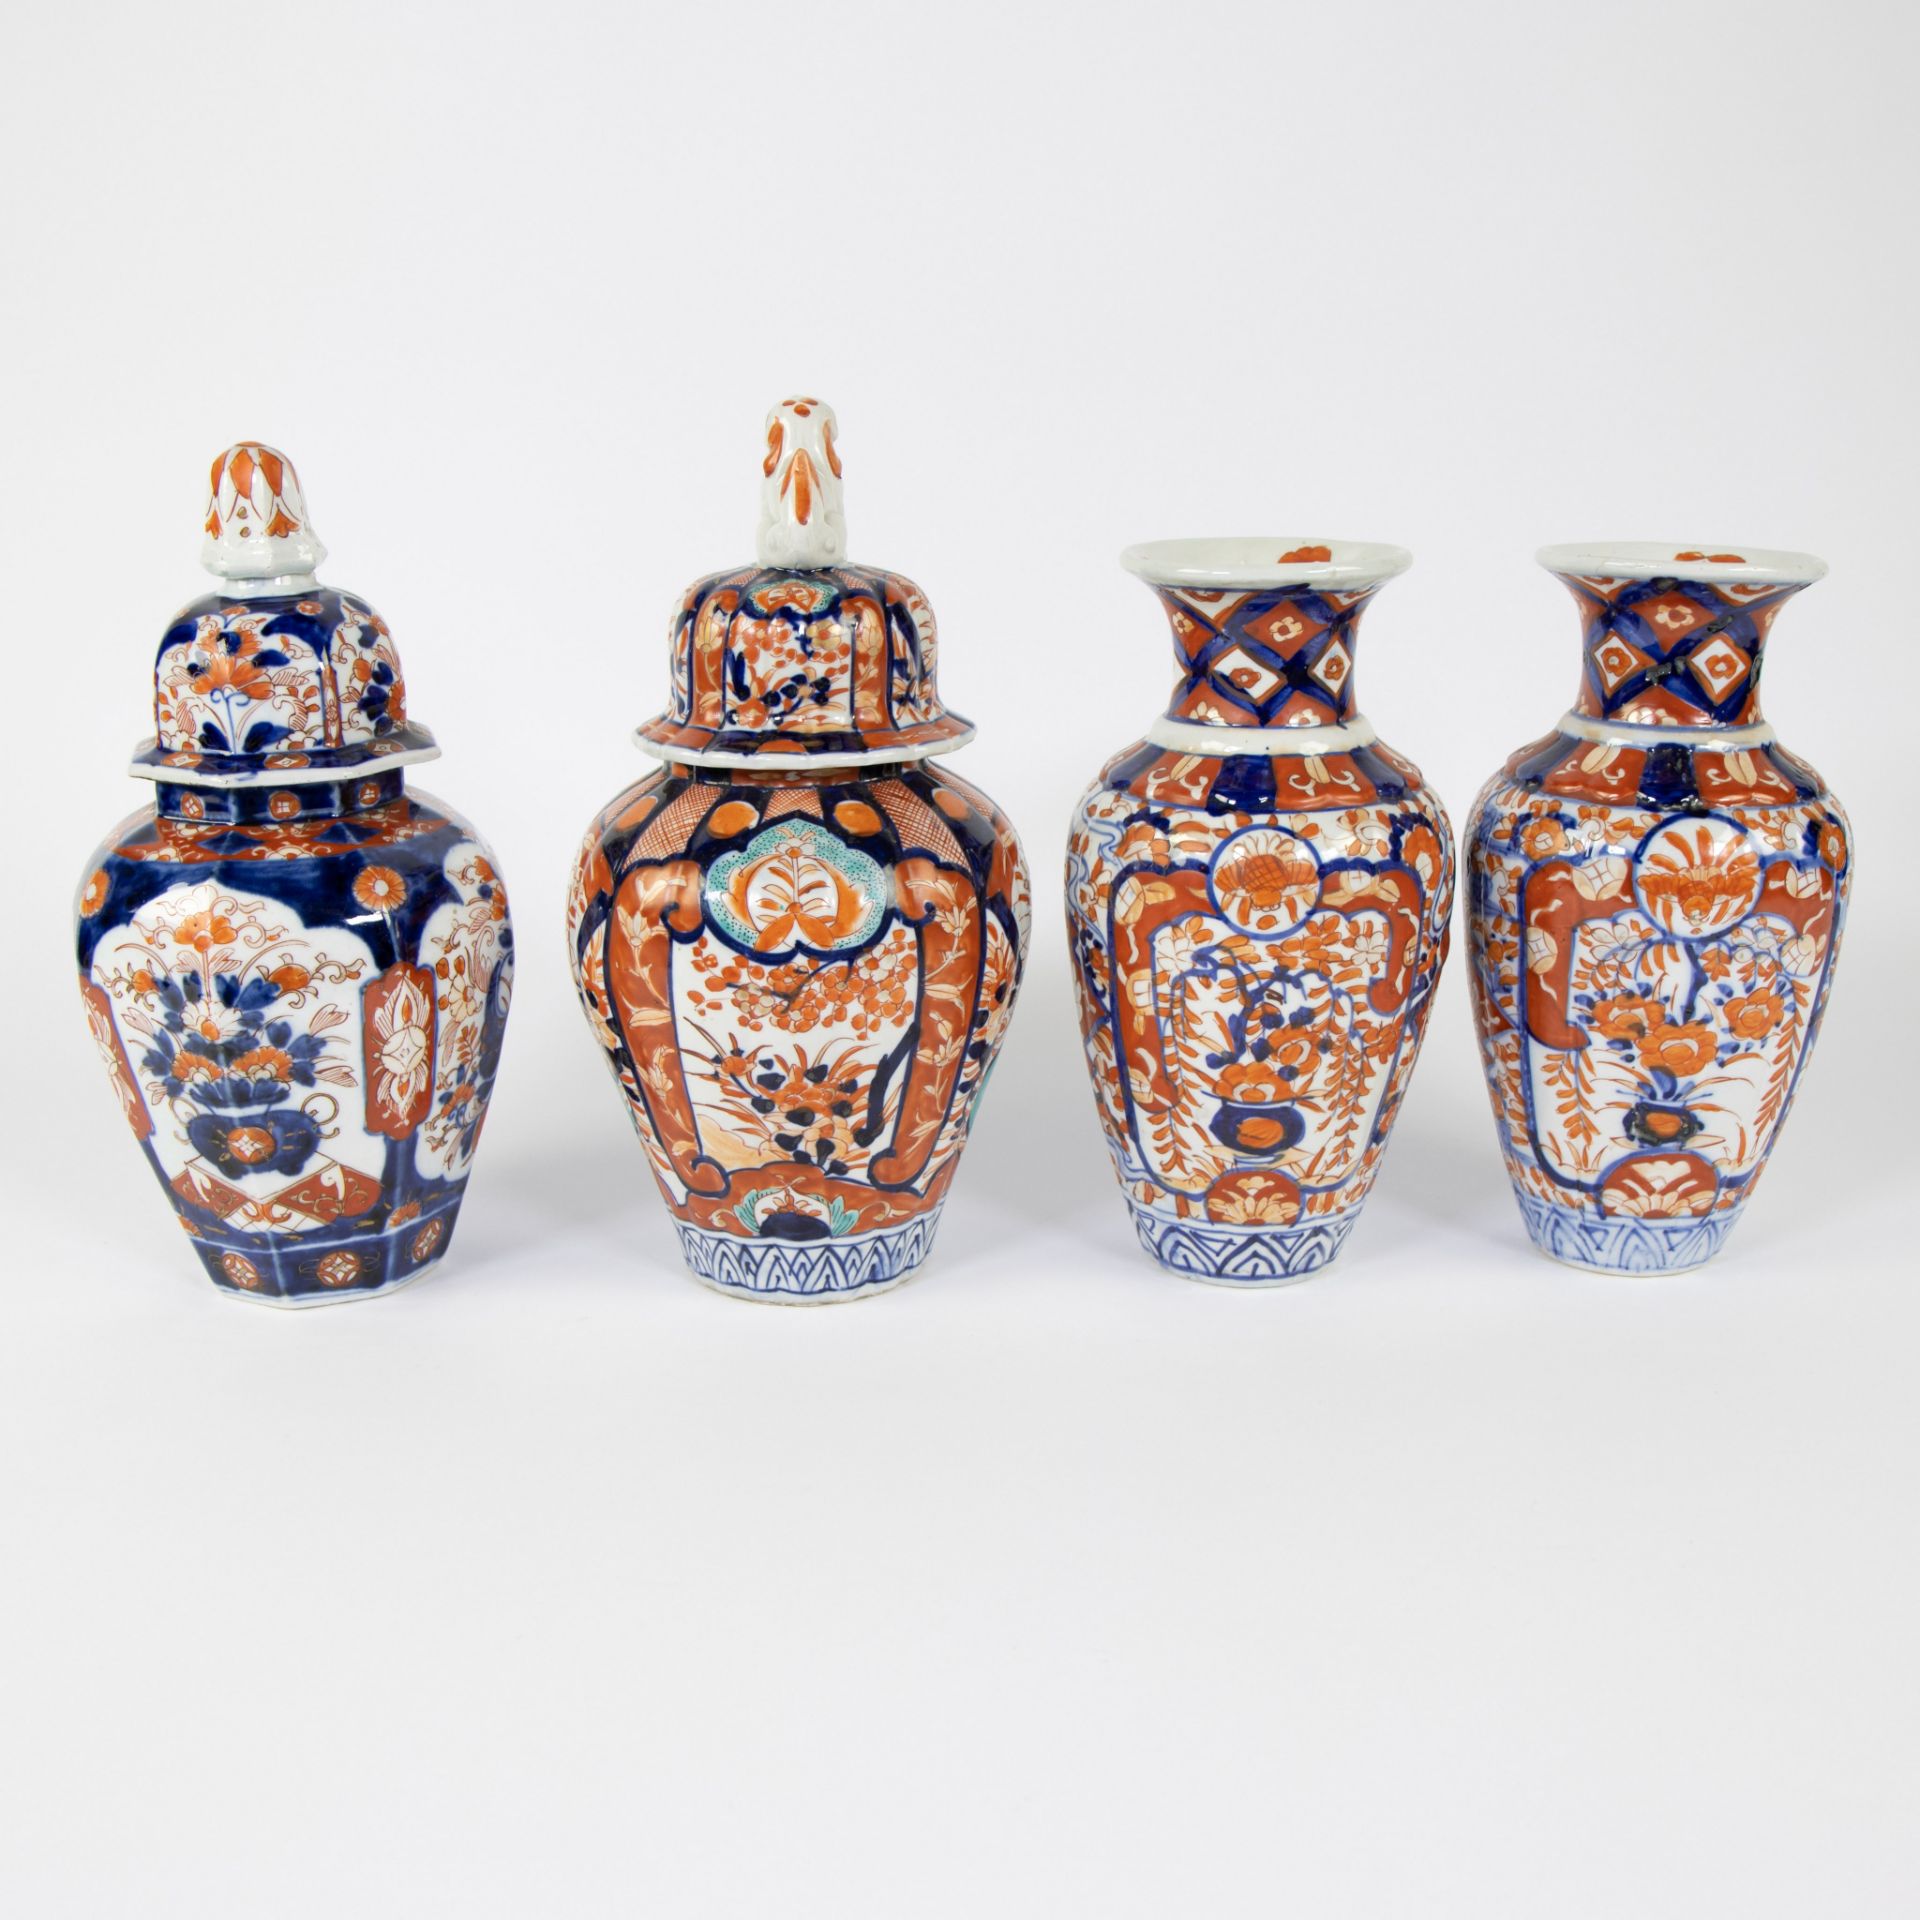 Pair of Japanese Imari vases and 2 lidded vases, 19th century - Image 2 of 6